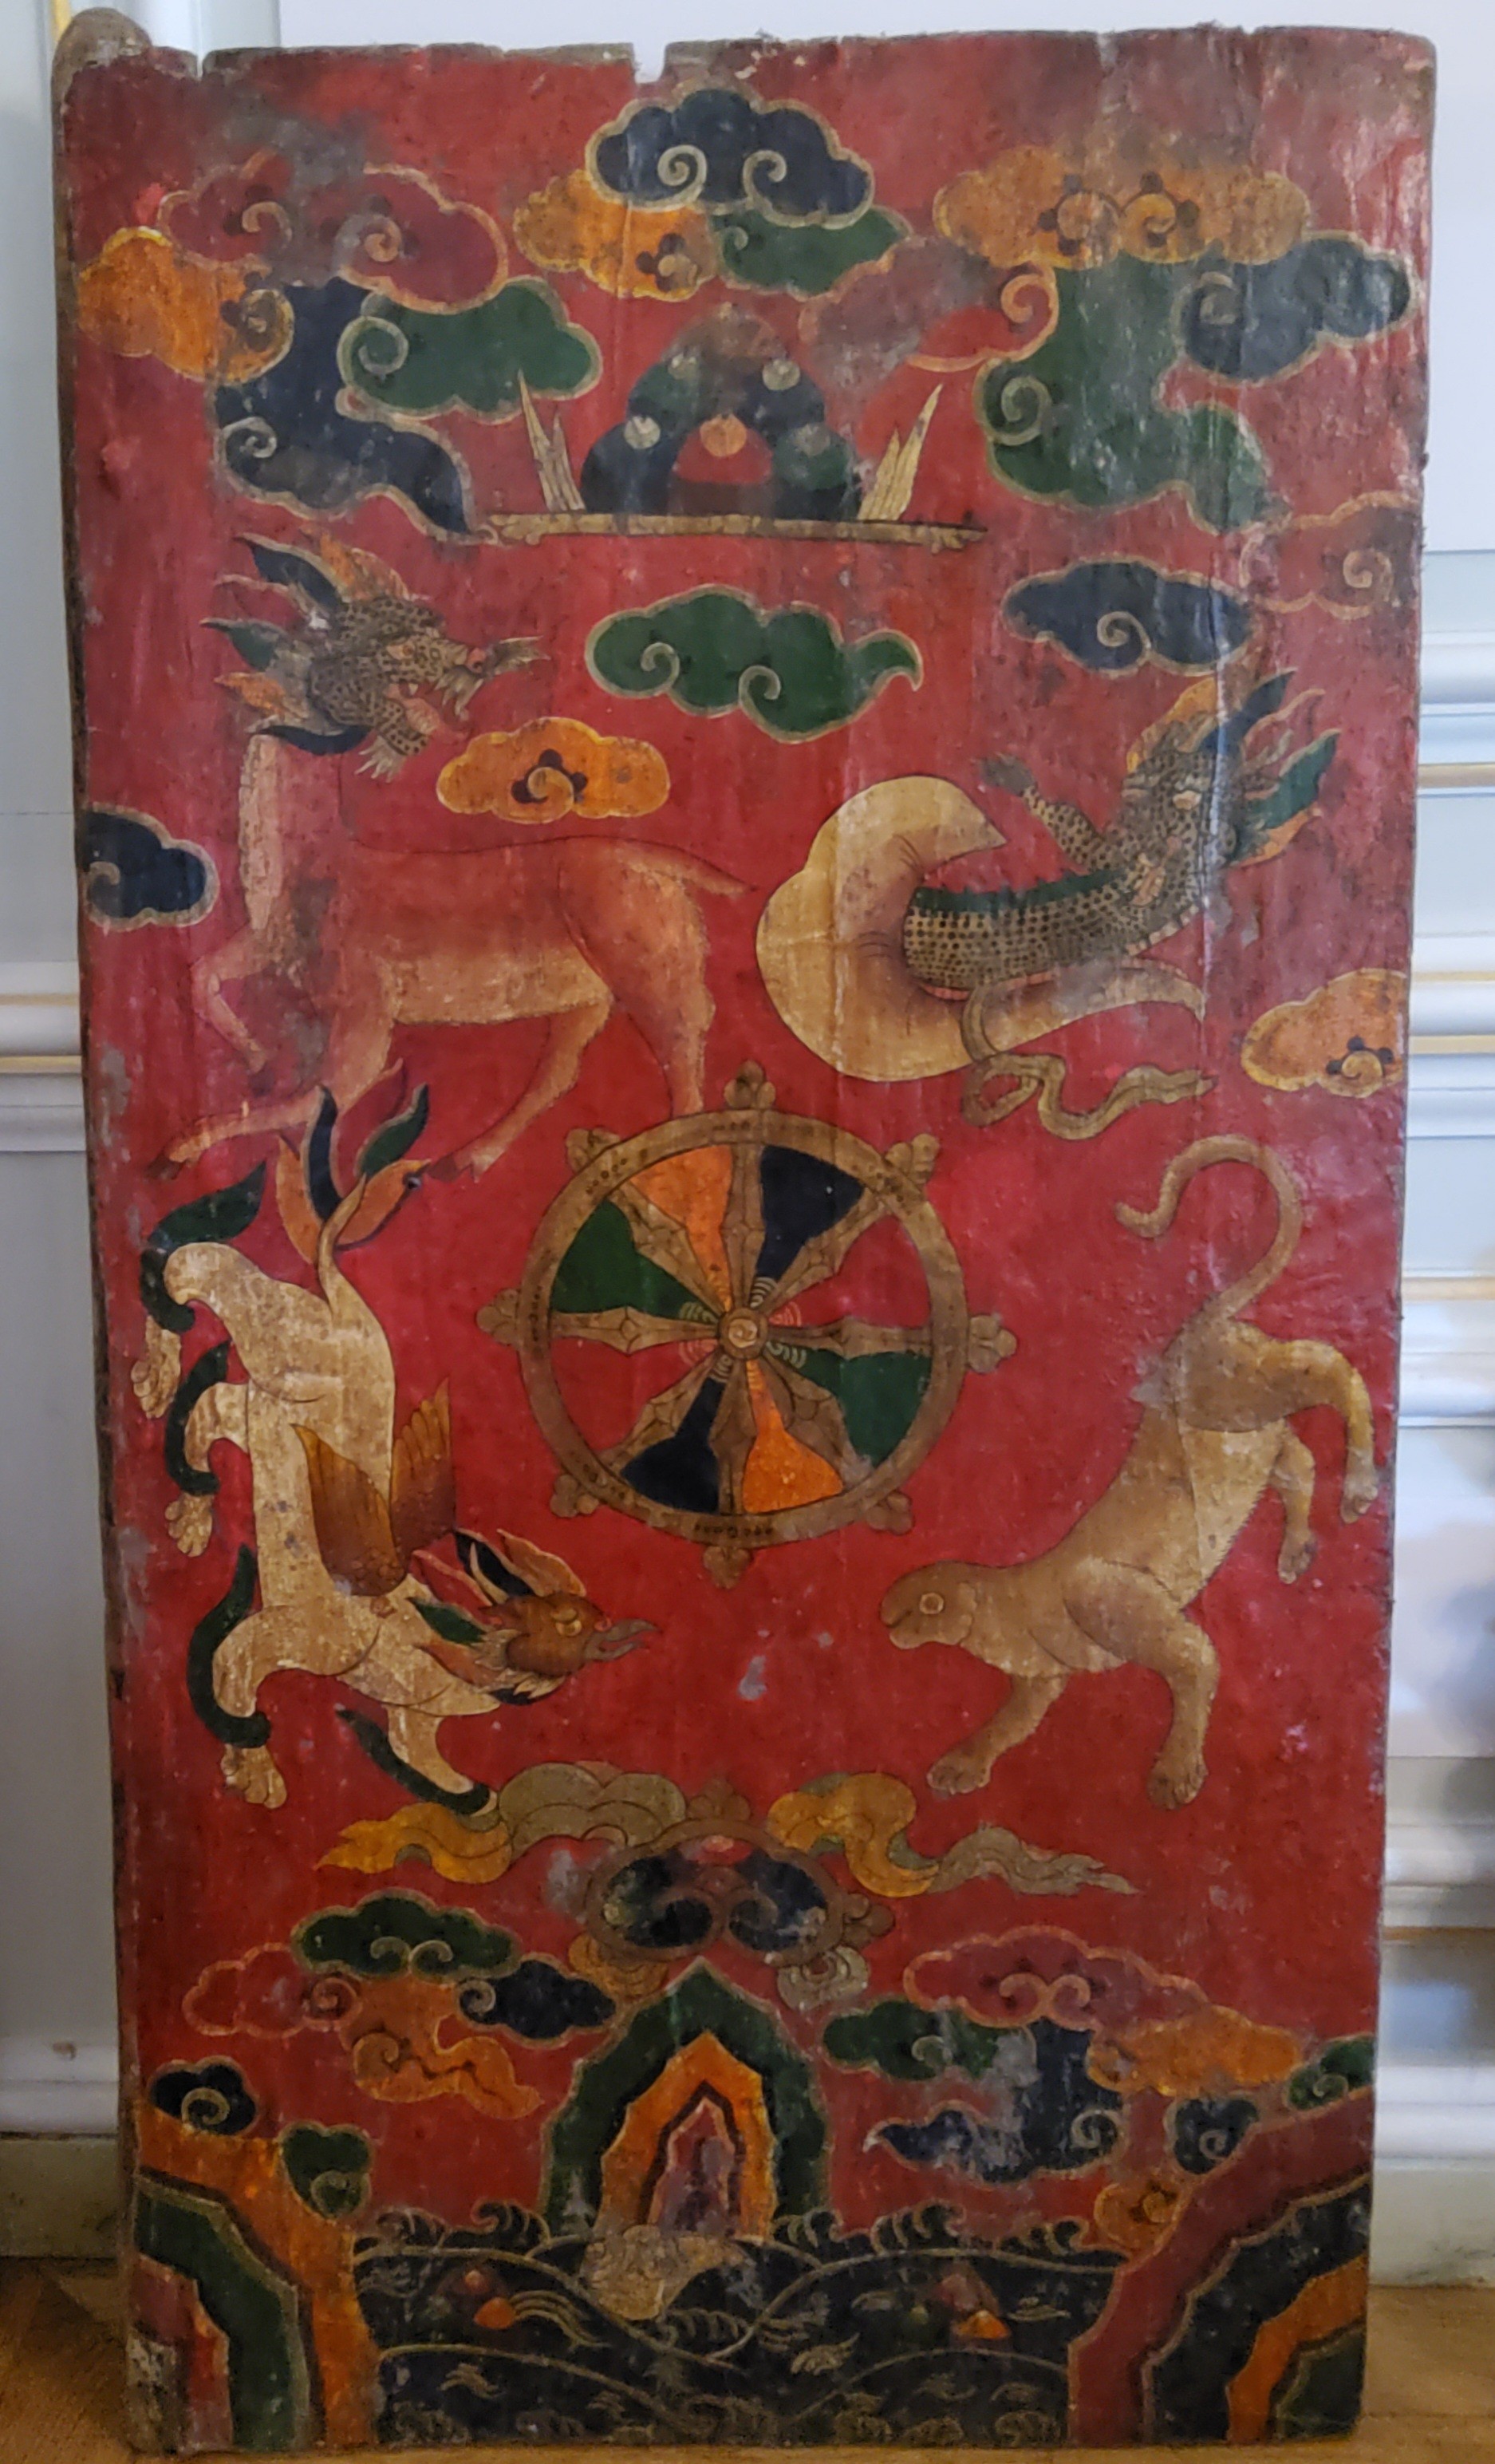 Himalayan Art - A 19th century Tibetan temple door panel, vibrantly hand painted with a central